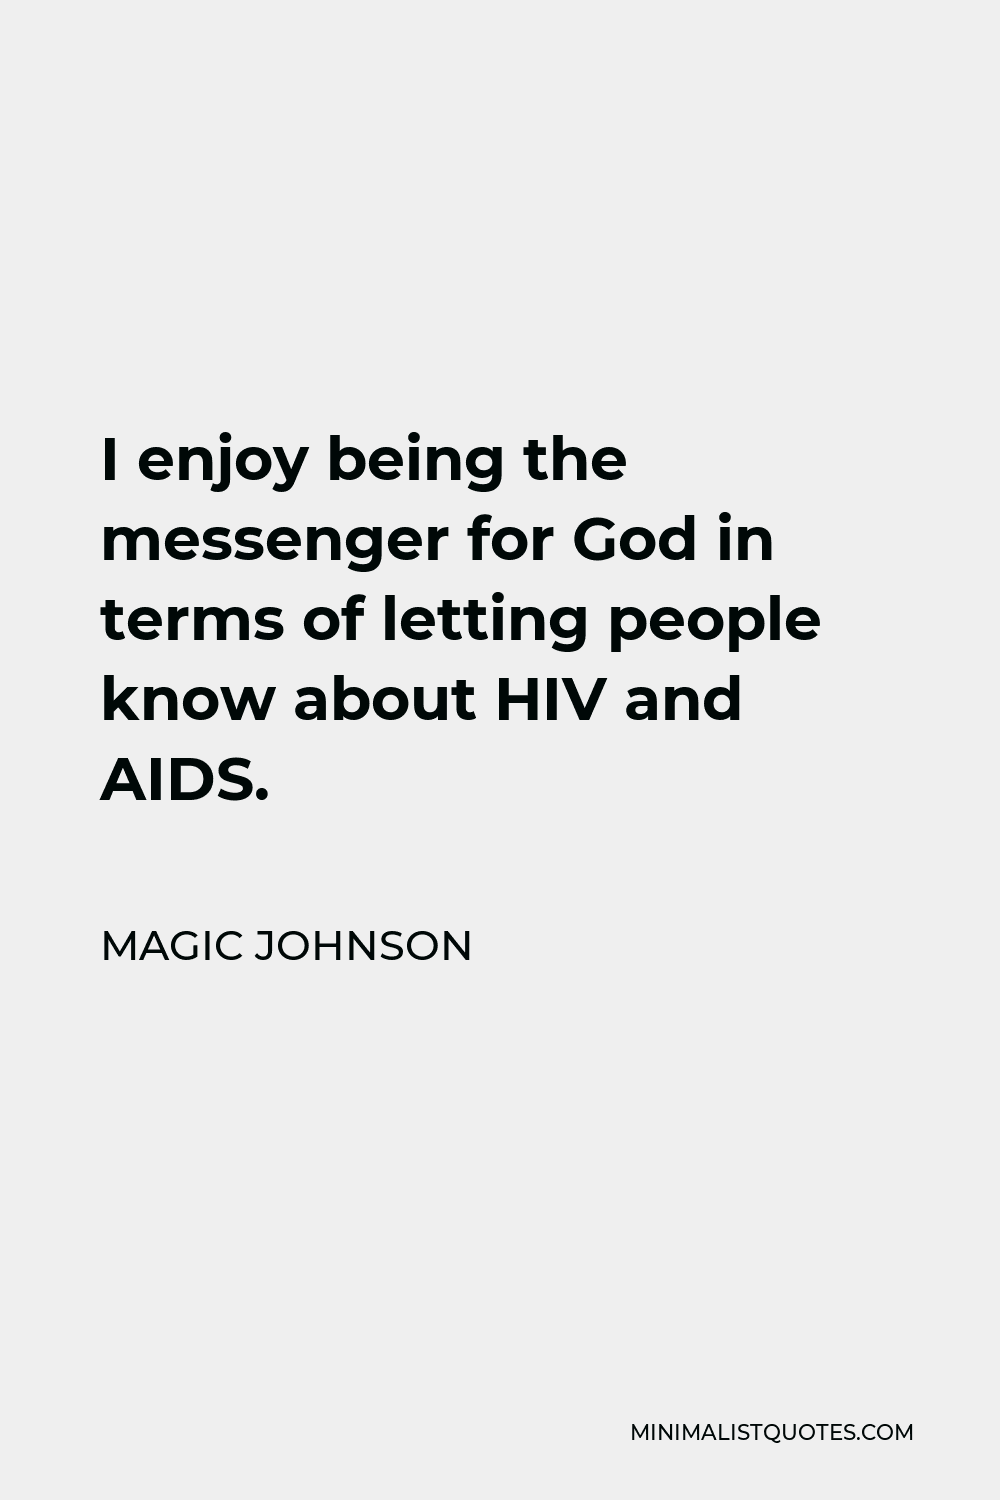 Magic Johnson Quote - I enjoy being the messenger for God in terms of letting people know about HIV and AIDS.